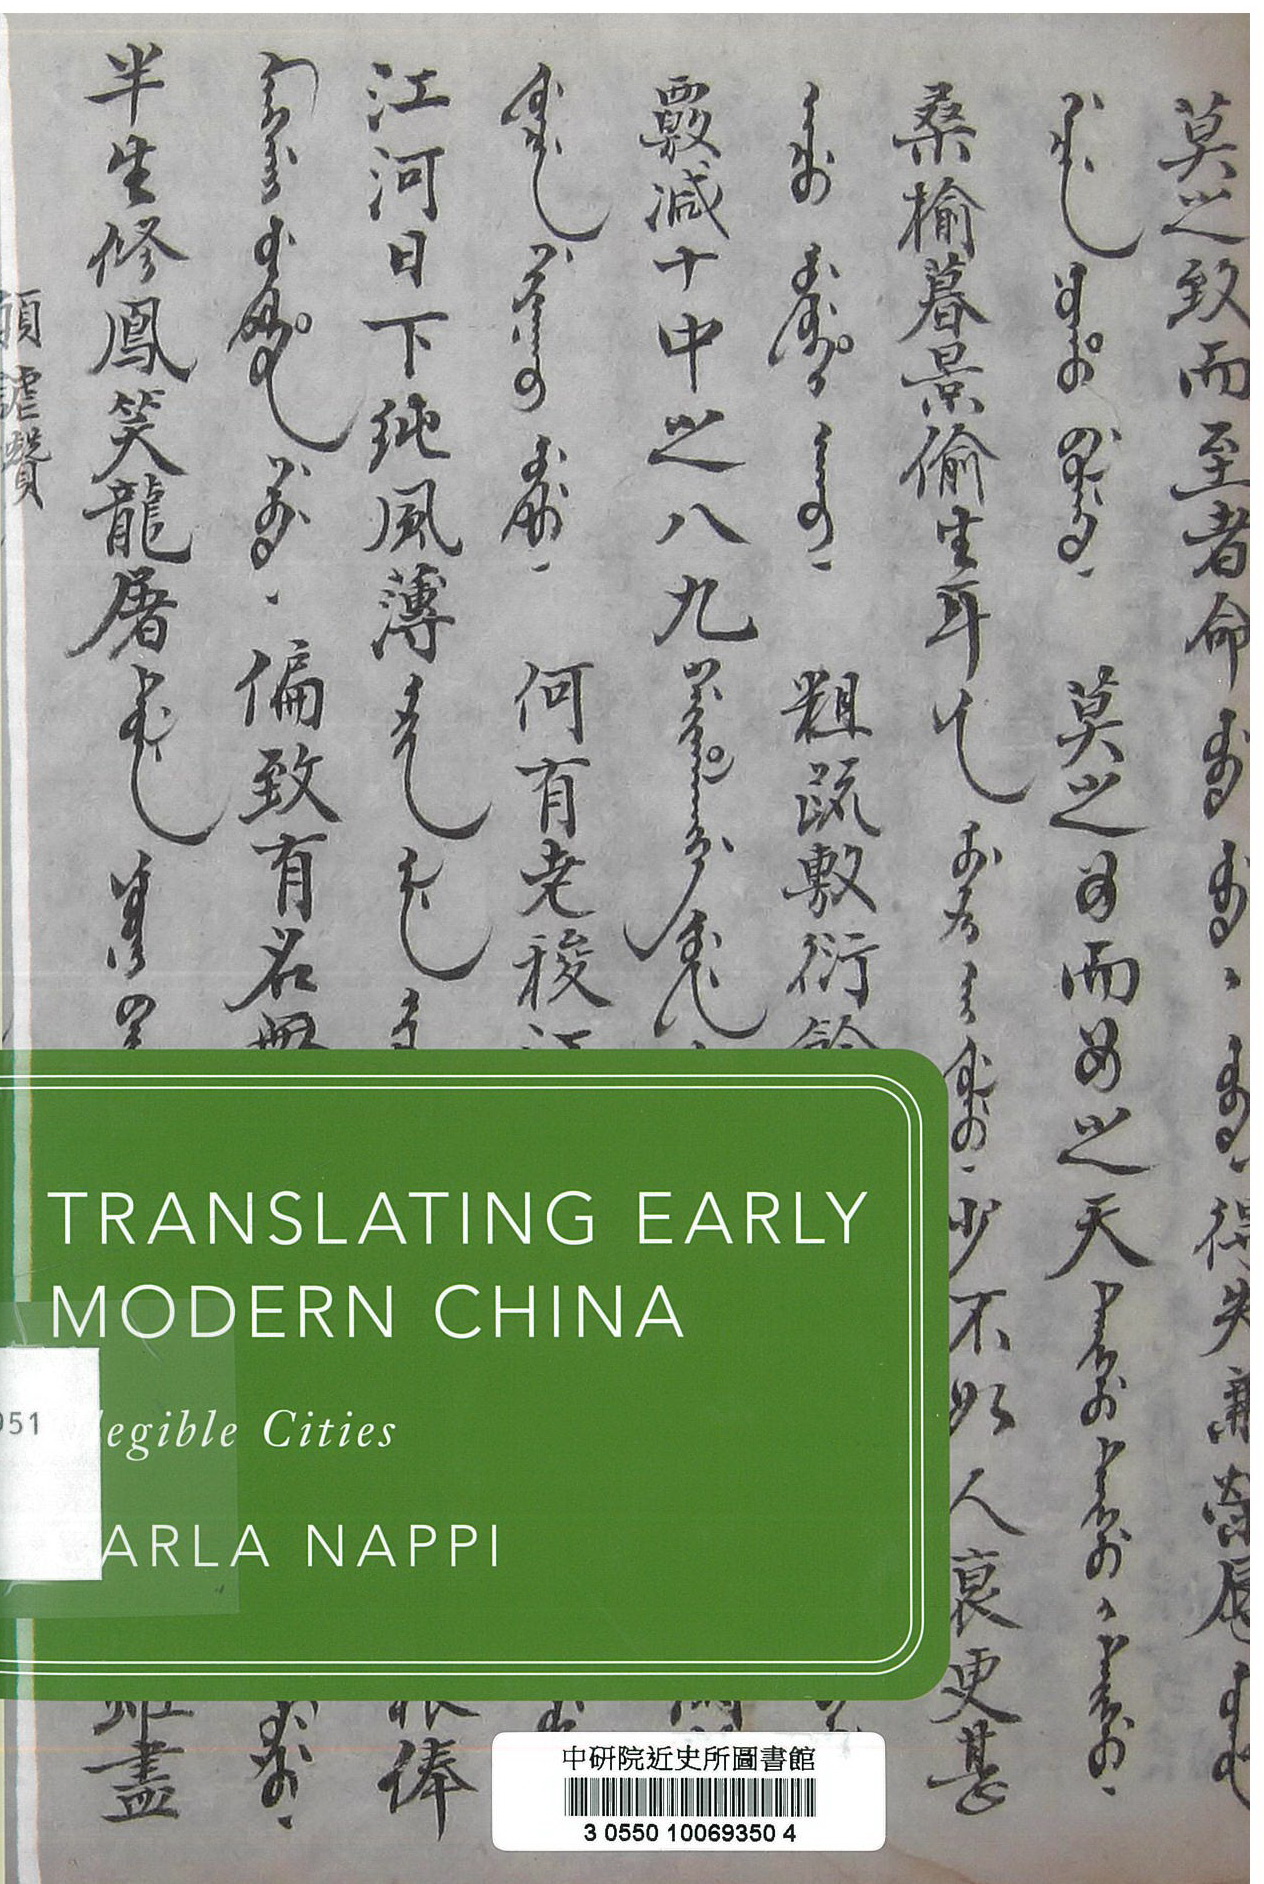 Translating early modern China : illegible cities